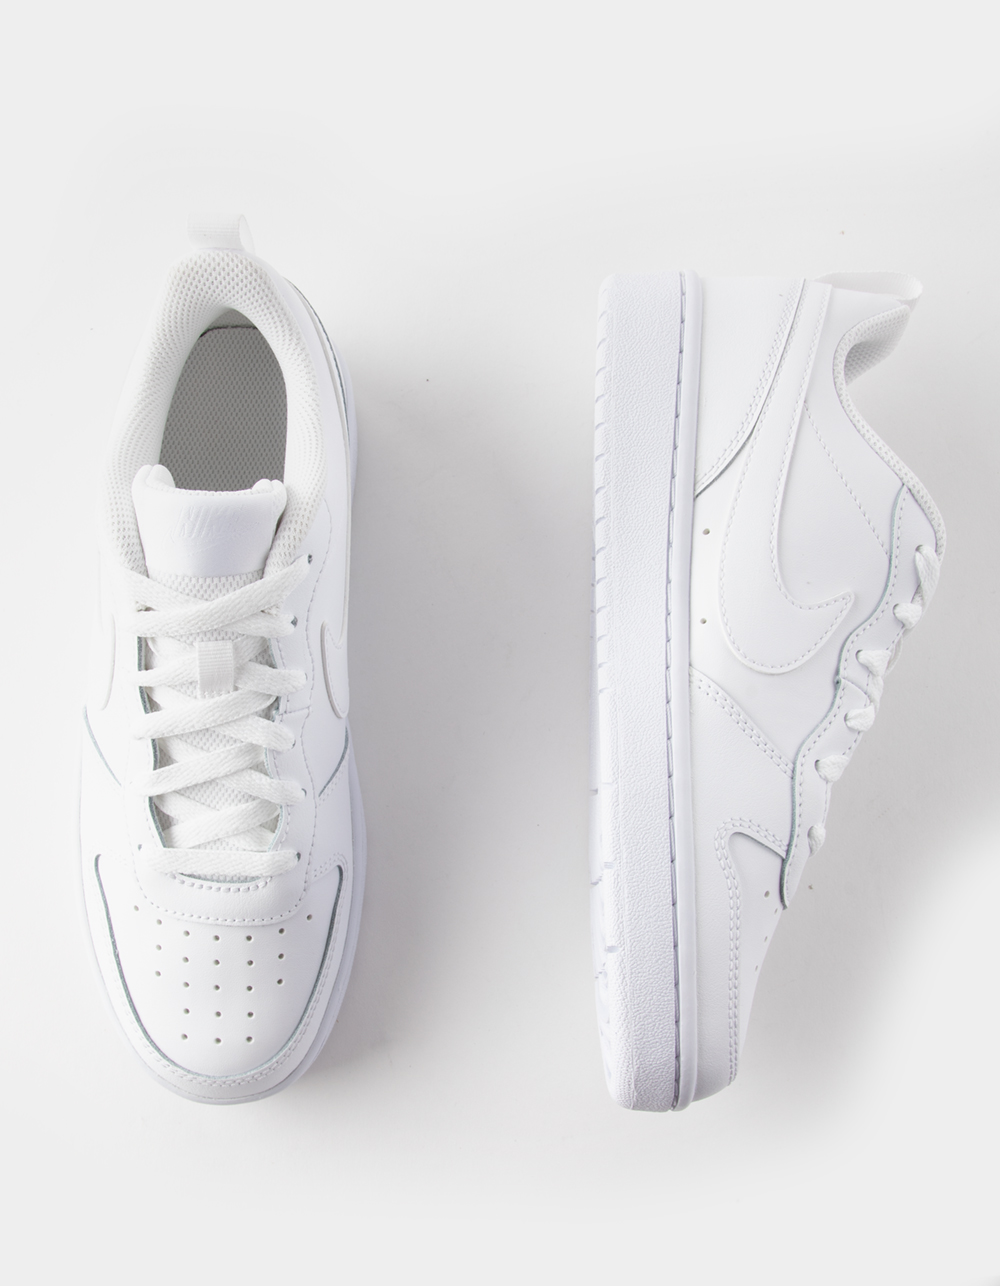 Dageraad musical Referendum NIKE Court Borough Low 2 Kids Shoes - WHITE | Tillys